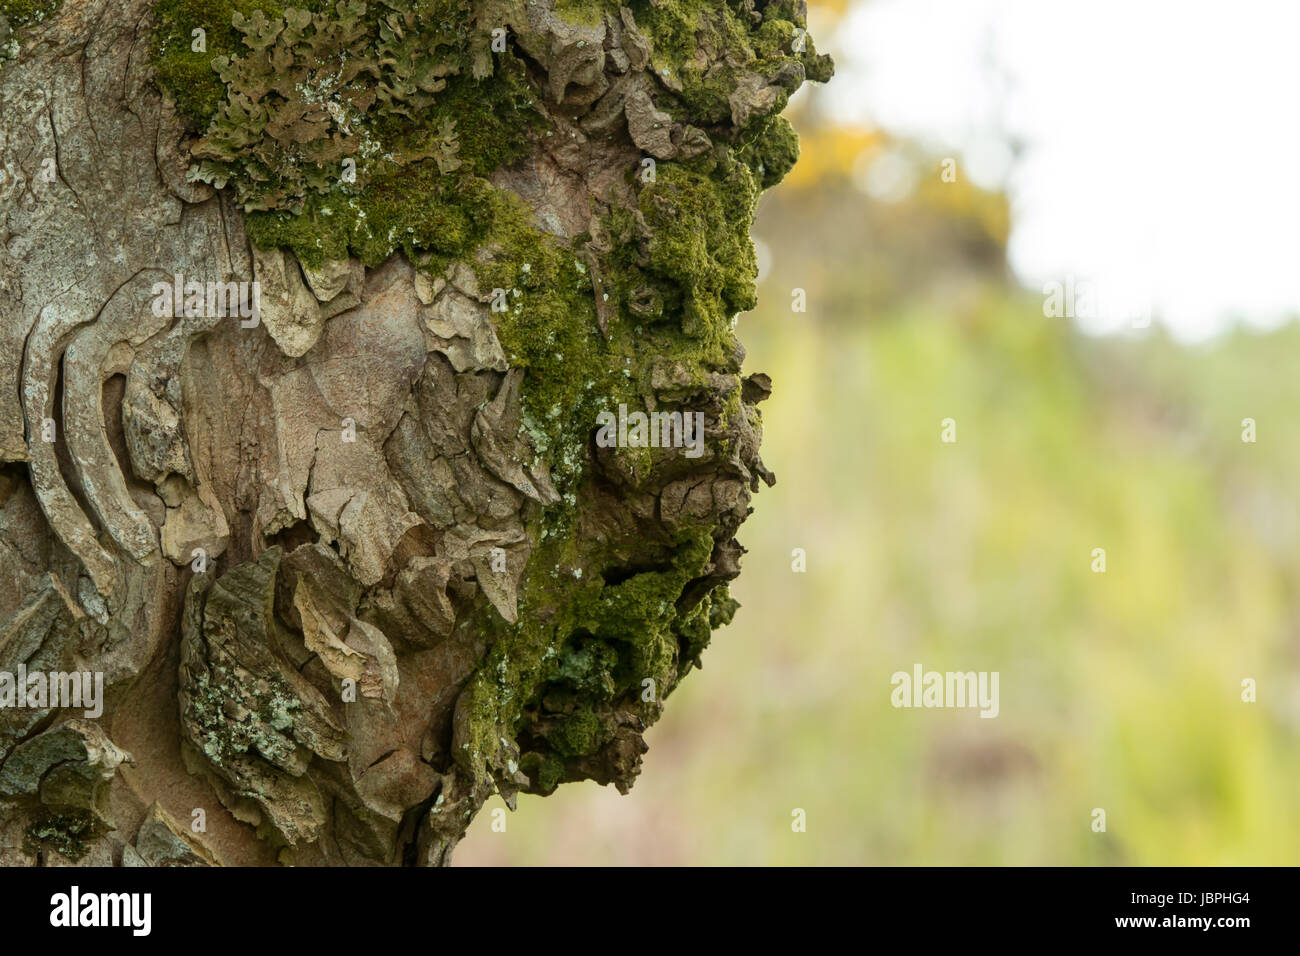 Tree bark giving uncanny appearance of face Stock Photo